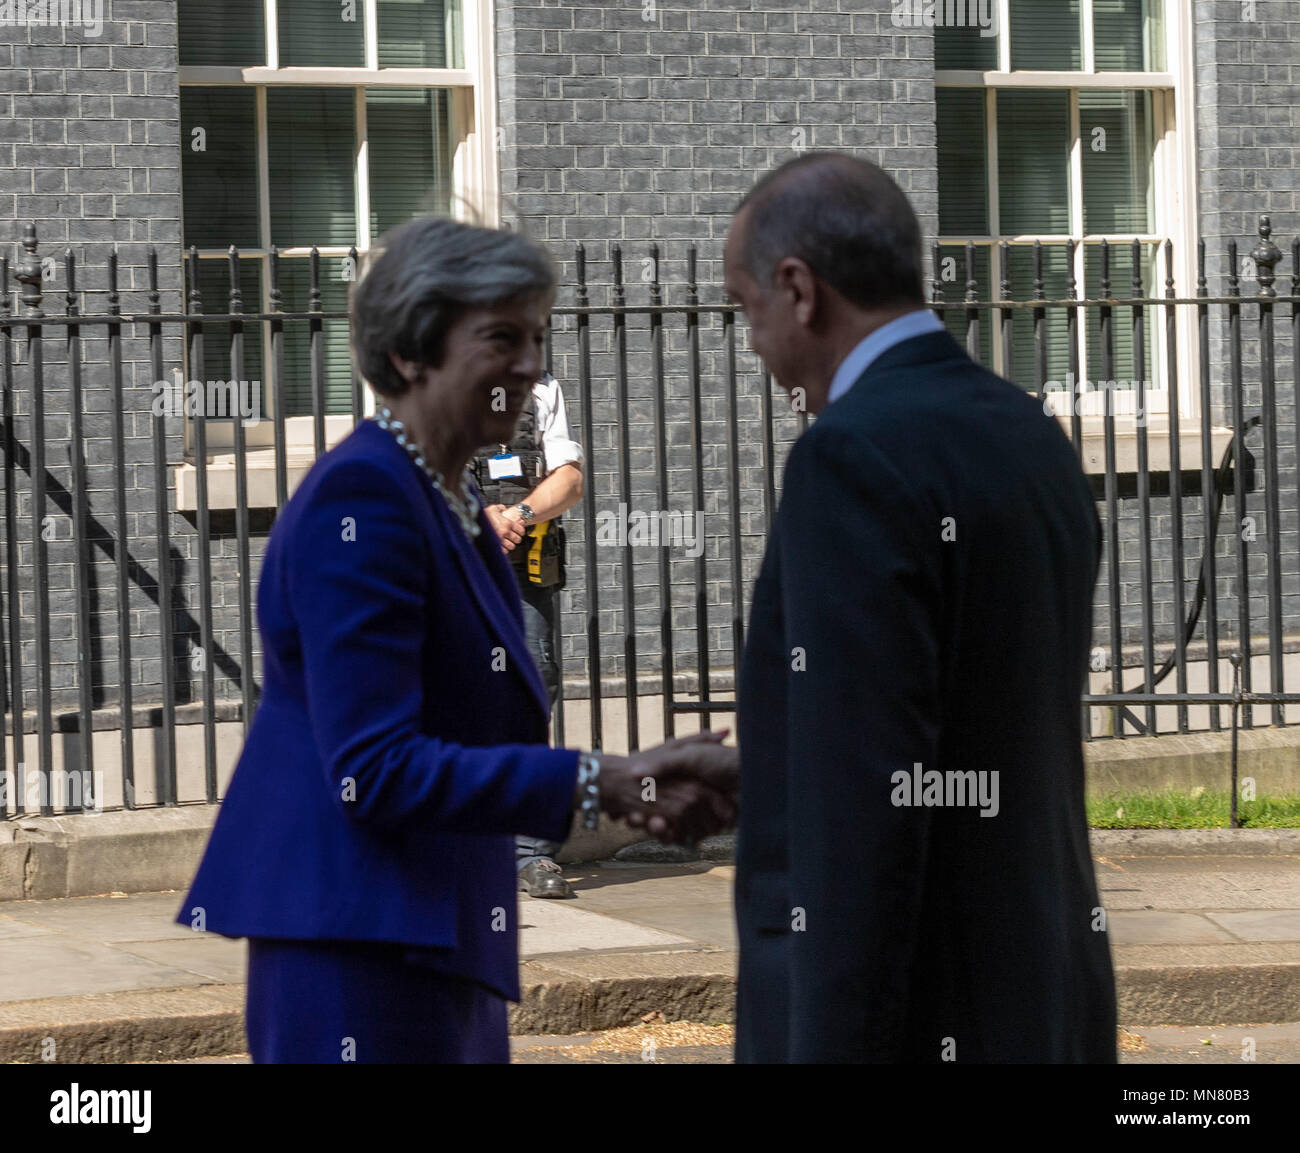 London 15th May 2018, President Recep Endogen with Prime Minister Theresa May at 10 Downing Street, Credit Ian Davidson/Alamy Live News Stock Photo